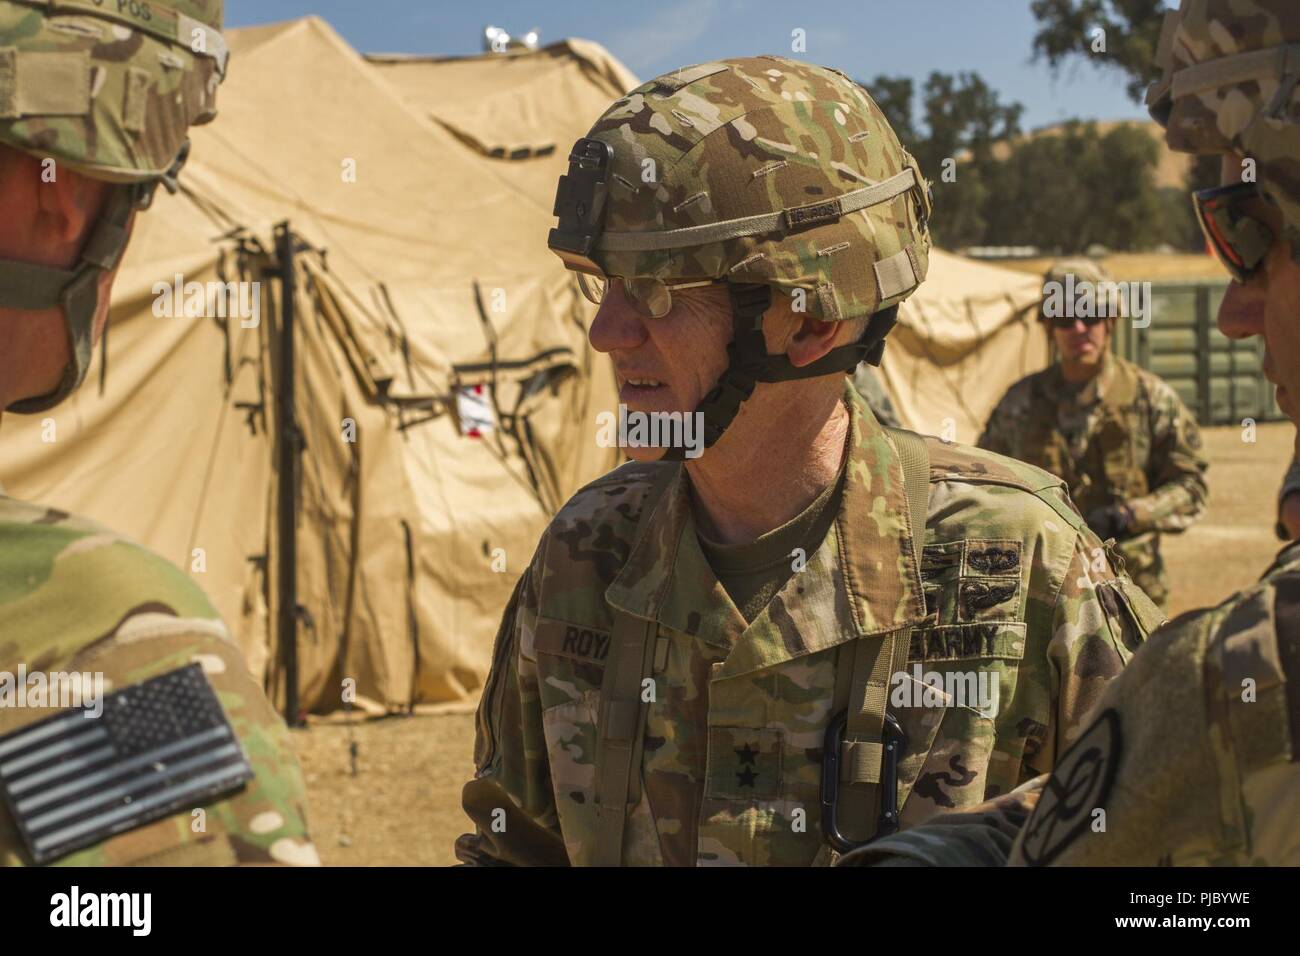 FORT HUNTER LIGGETT-- U.S. Army Reserve Maj. Gen. A. Ray Royalty visits various units during the 91st Training Division's Combat Support Training Exercise on Ft. Hunter Liggett, California, July 17, 2018. The CSTX 91-18-01 ensures America’s Army Reserve units are trained to deploy bringing capable, combat-ready, and lethal firepower in support of the Army and our joint partners anywhere in the world. Stock Photo